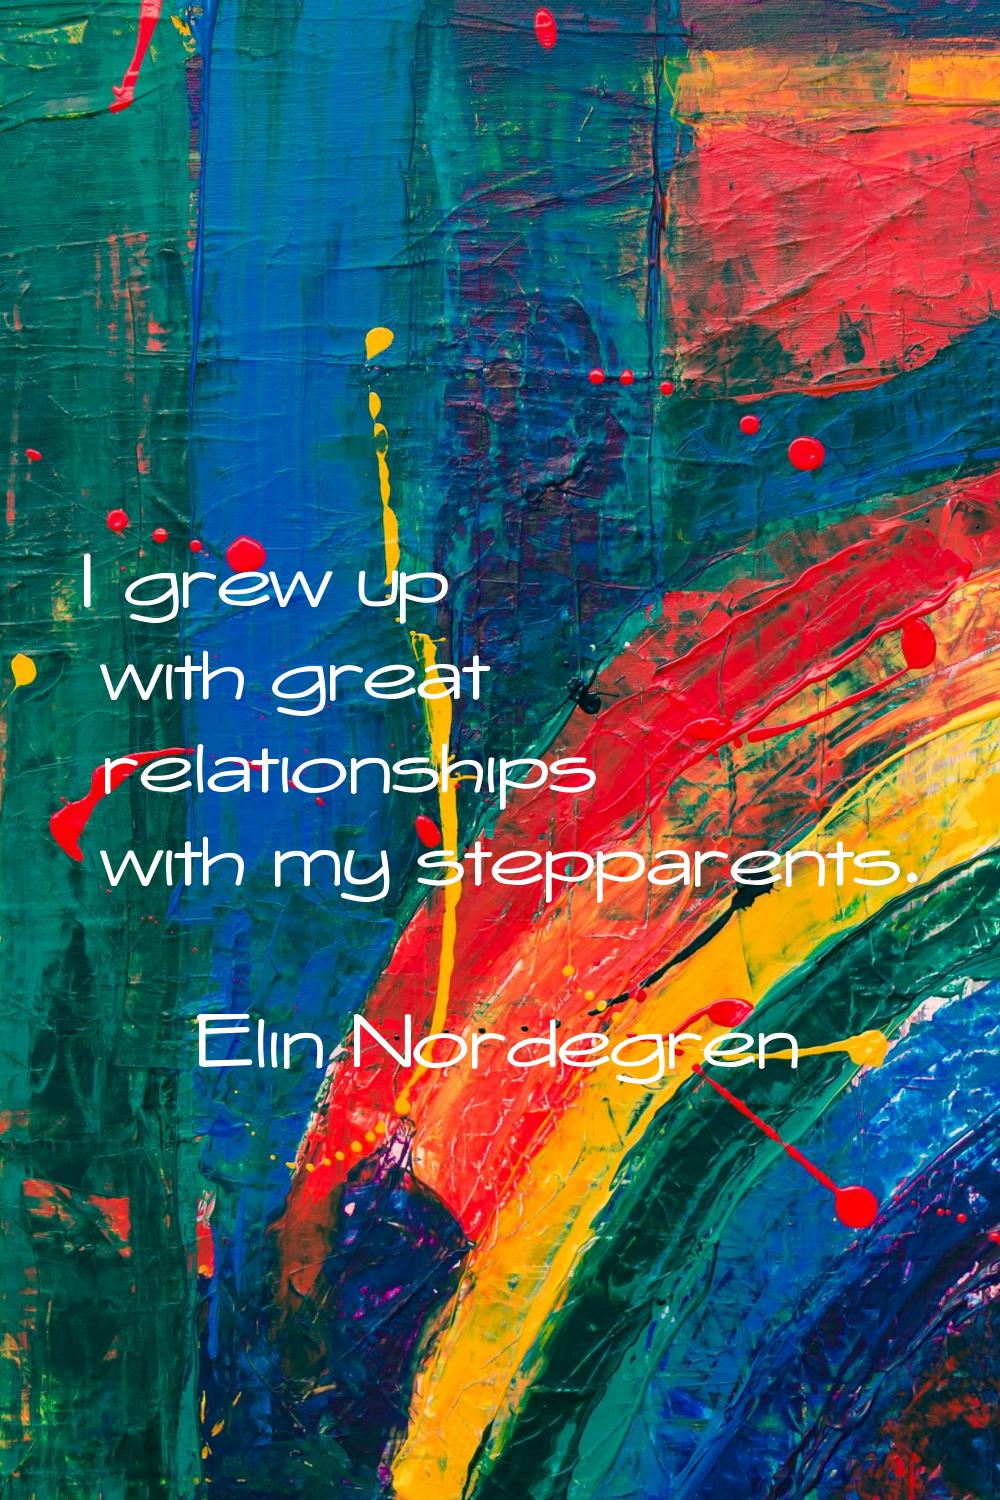 I grew up with great relationships with my stepparents.